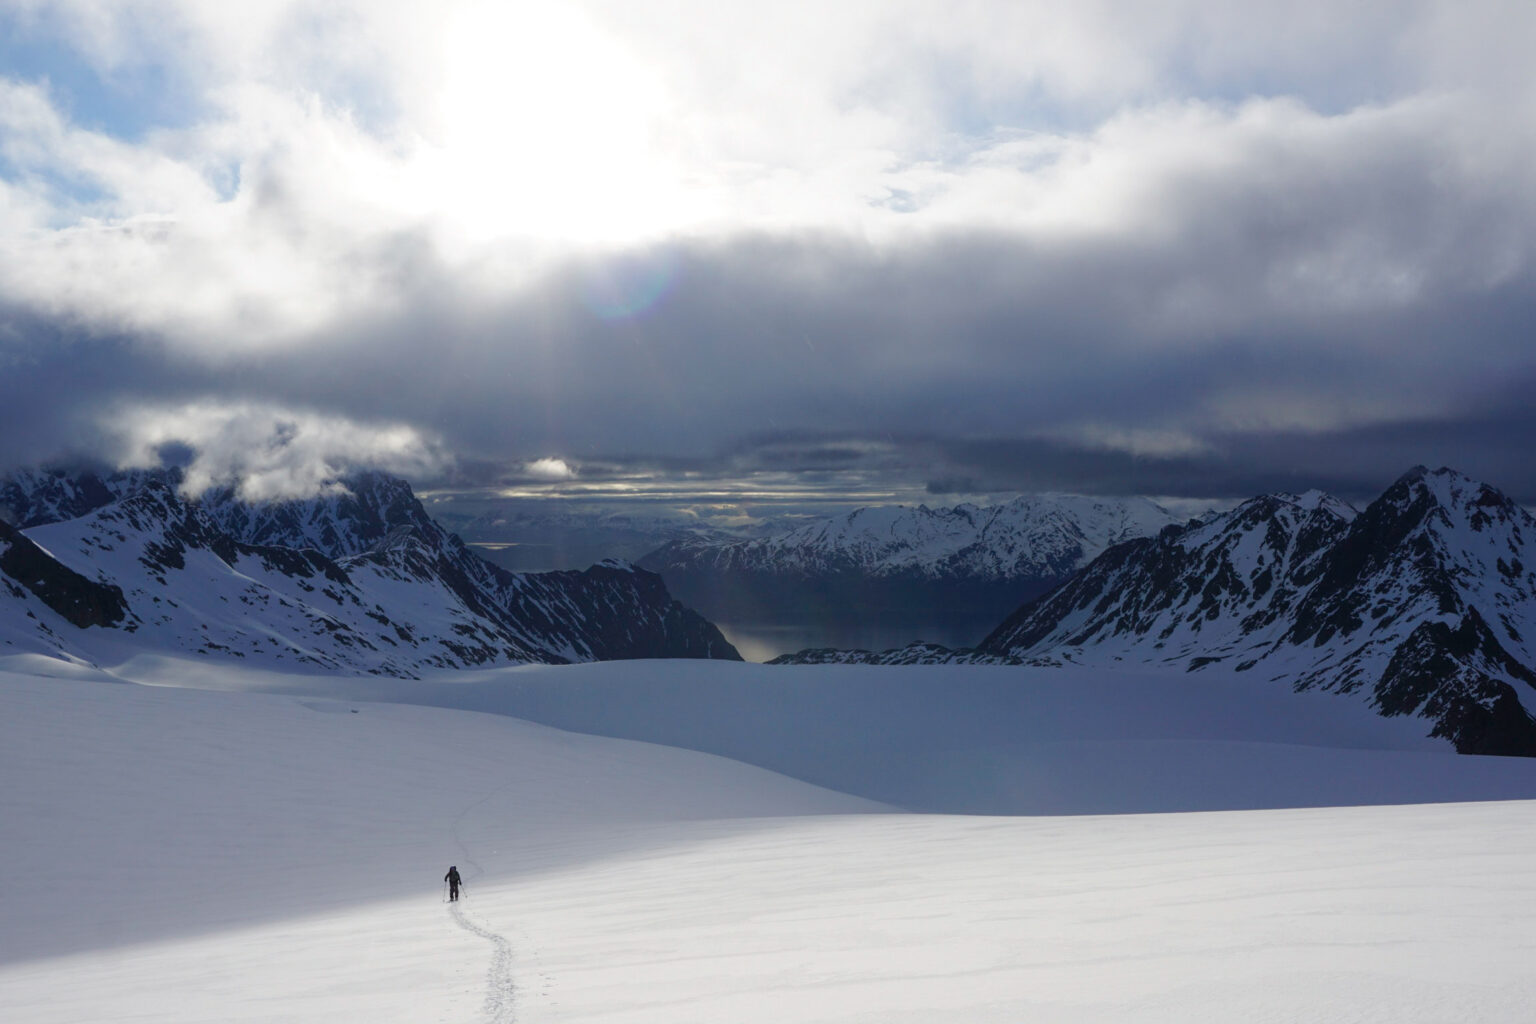 Climbing up the Strupbeen Glacier in the Lyngen Alps of Norway